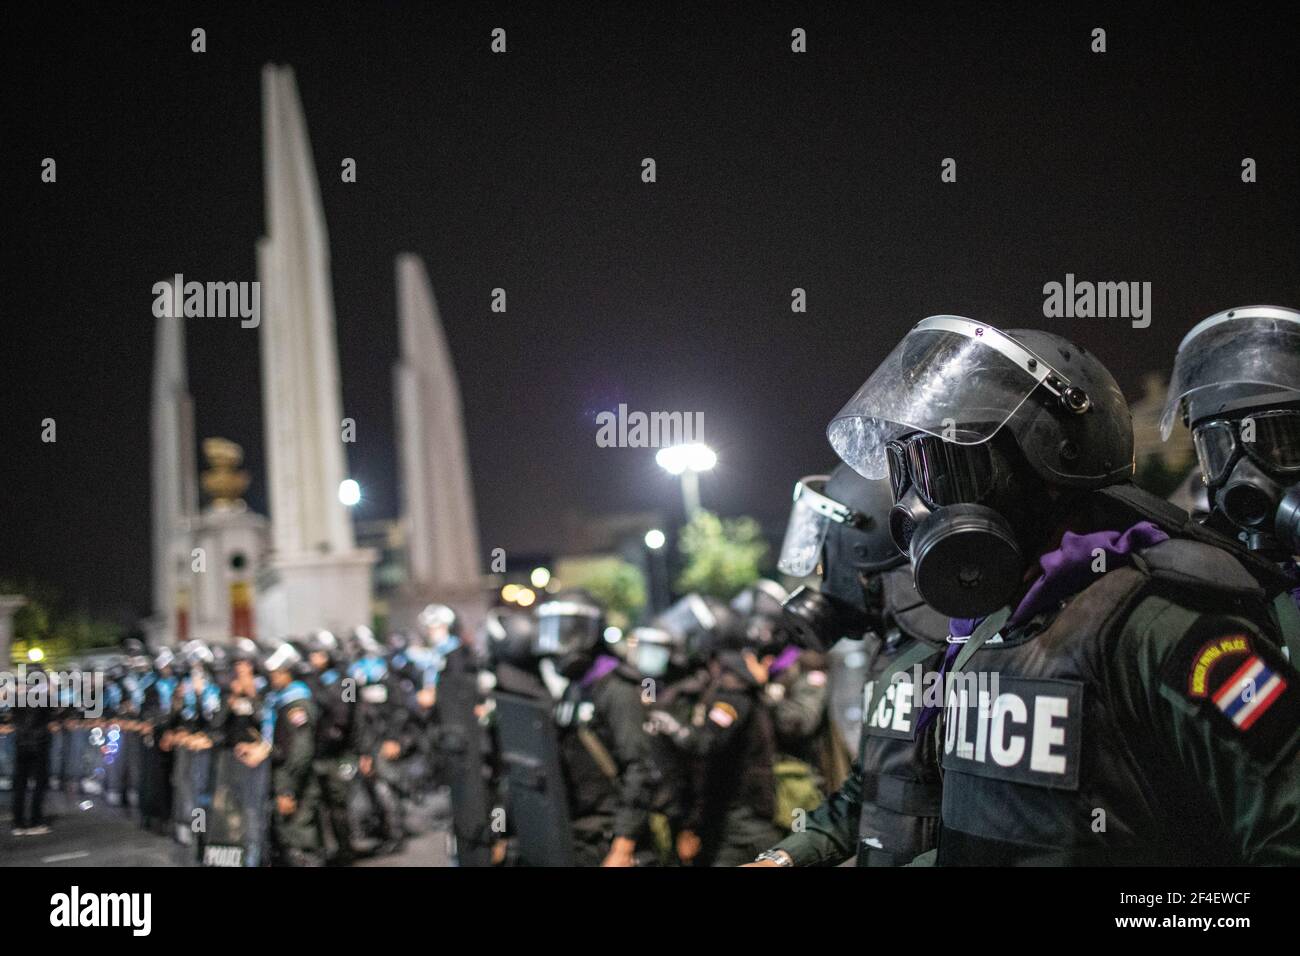 Riot police officers wearing gas mask stand guard near the Democracy Monument during an anti-government demonstration in Bangkok. Thousands of pro-democracy protesters gathered near the Grand Palace in Sanam Luang demanding the resignation of Thailand Prime Minister and the reform of the monarchy. The protesters also denounced the use of the Lese Majeste law under the section 112 of the penal code. The protest organized by REDEM (Restart Democracy) ended up with several clashes, the use of water cannon, tear gas and rubber bullet, which had left several injured. Stock Photo